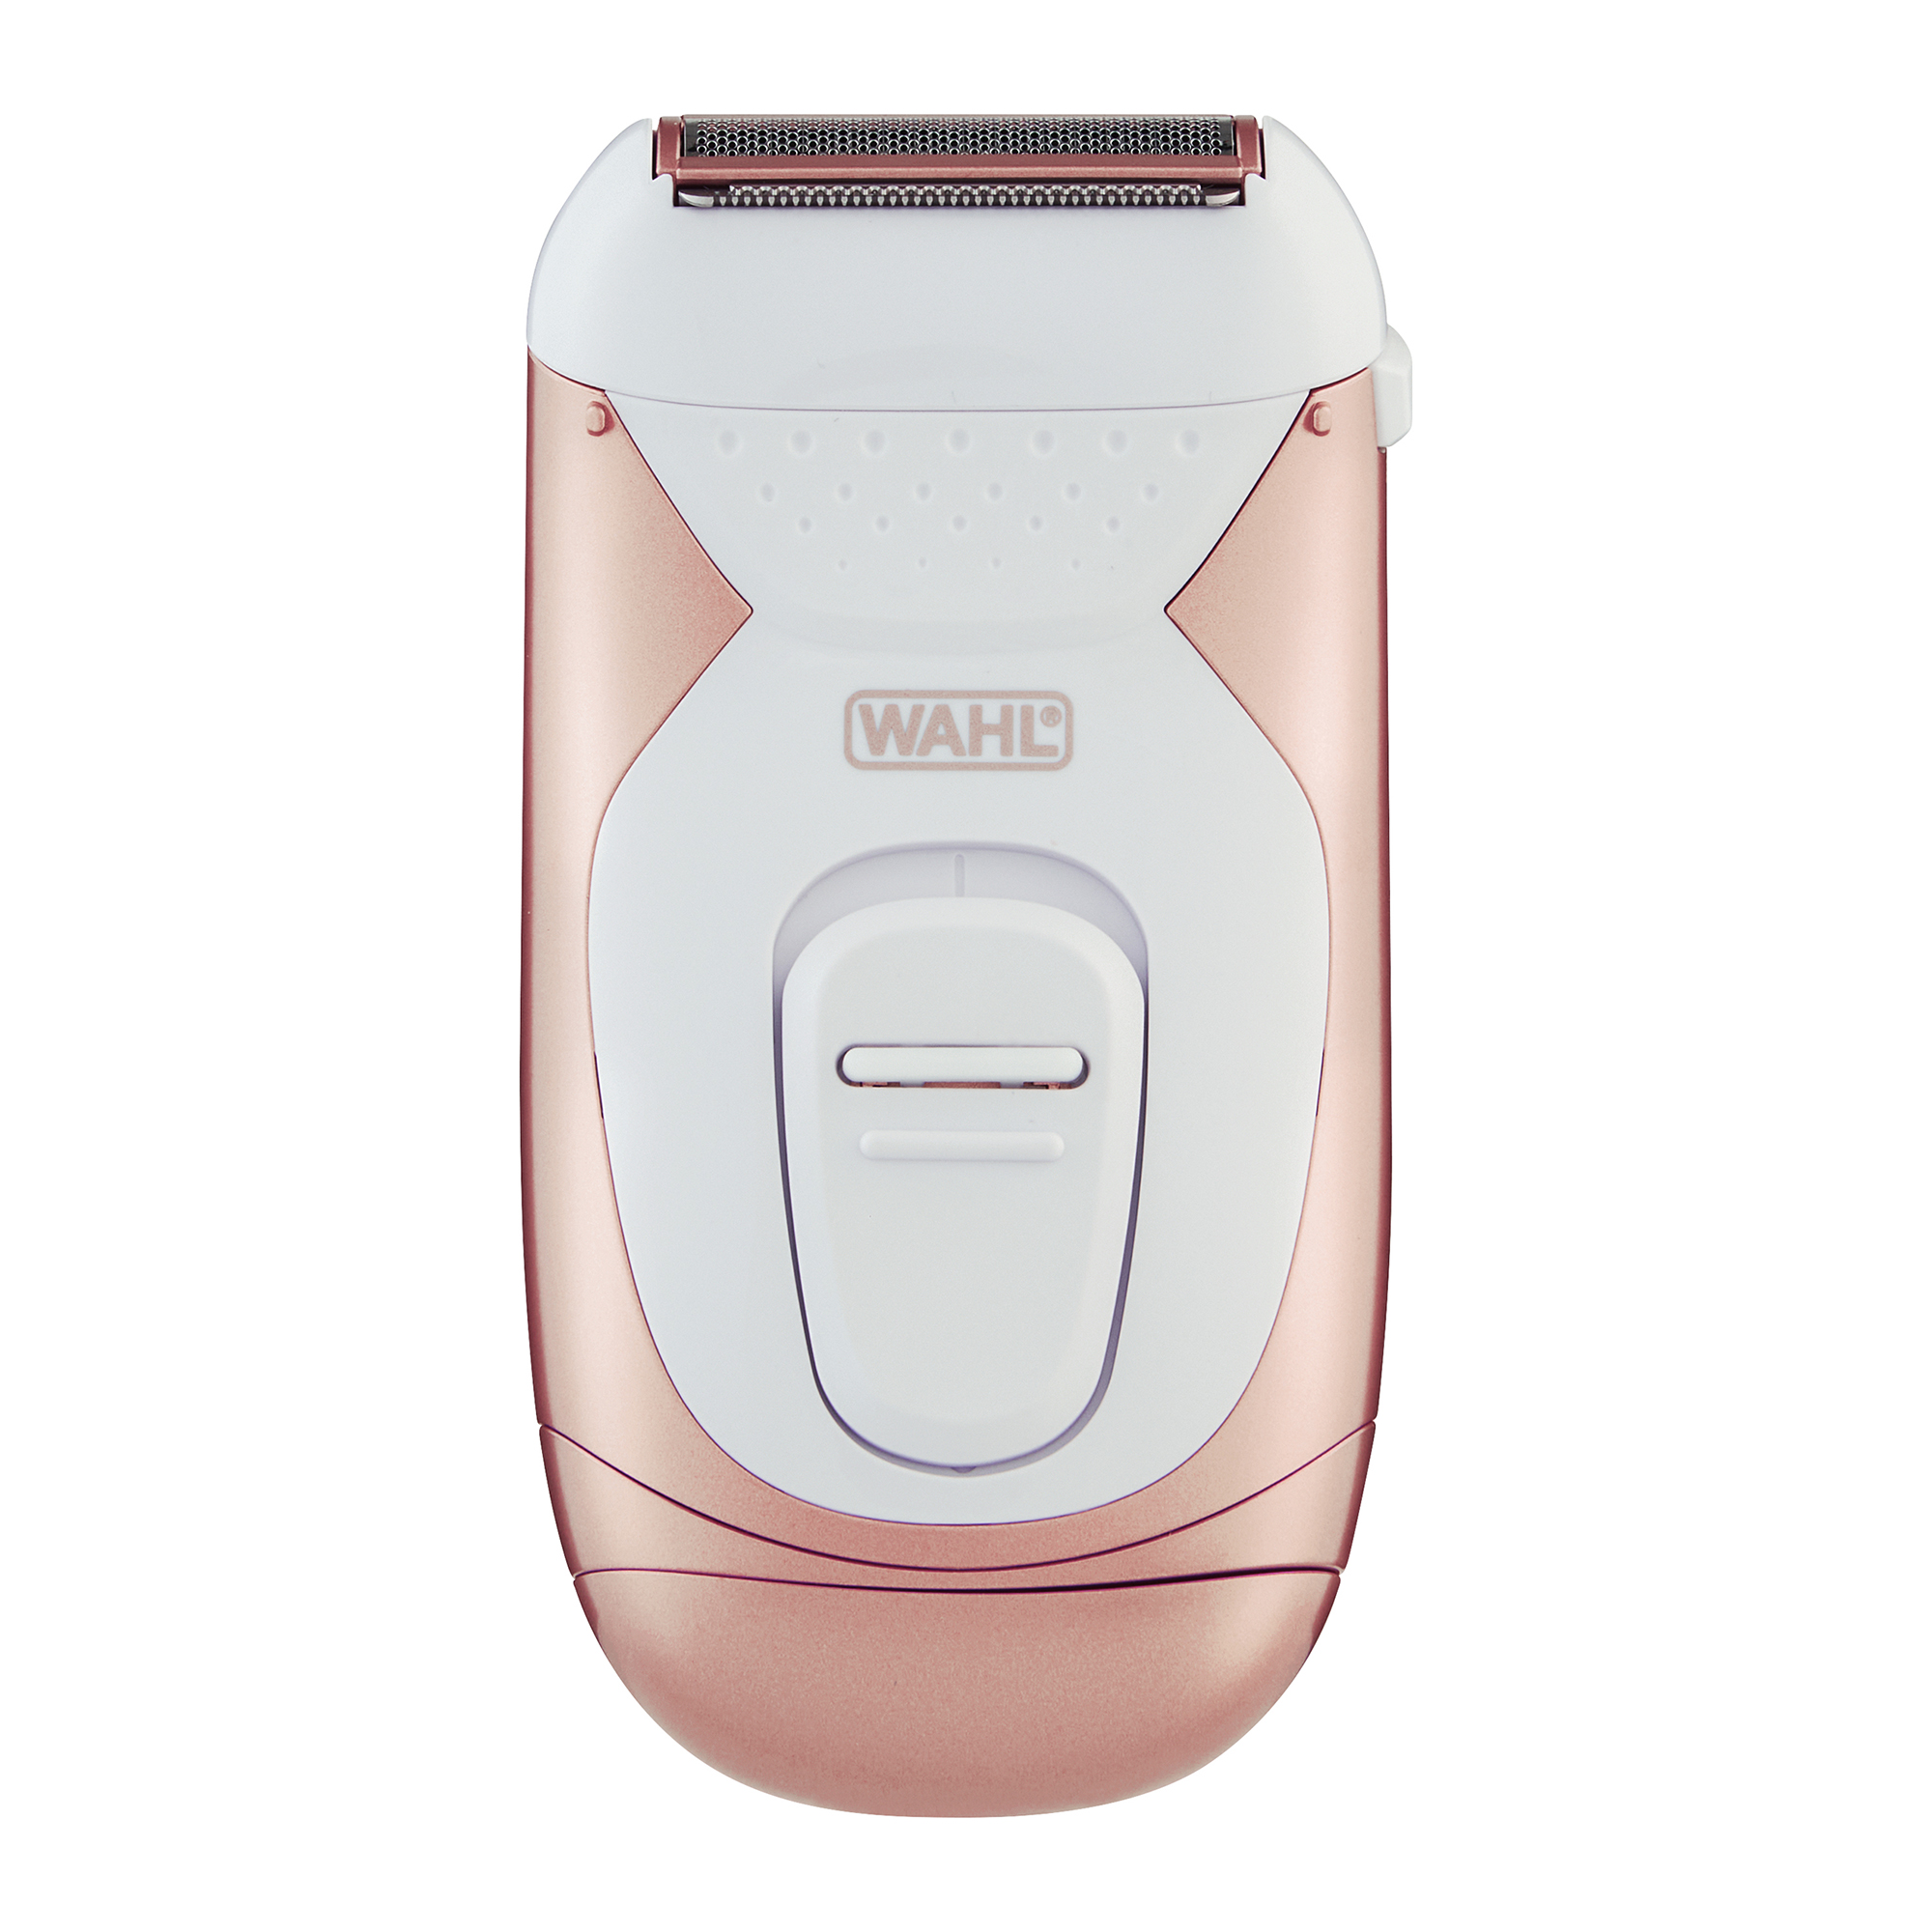 Product Listing | Wahl Global